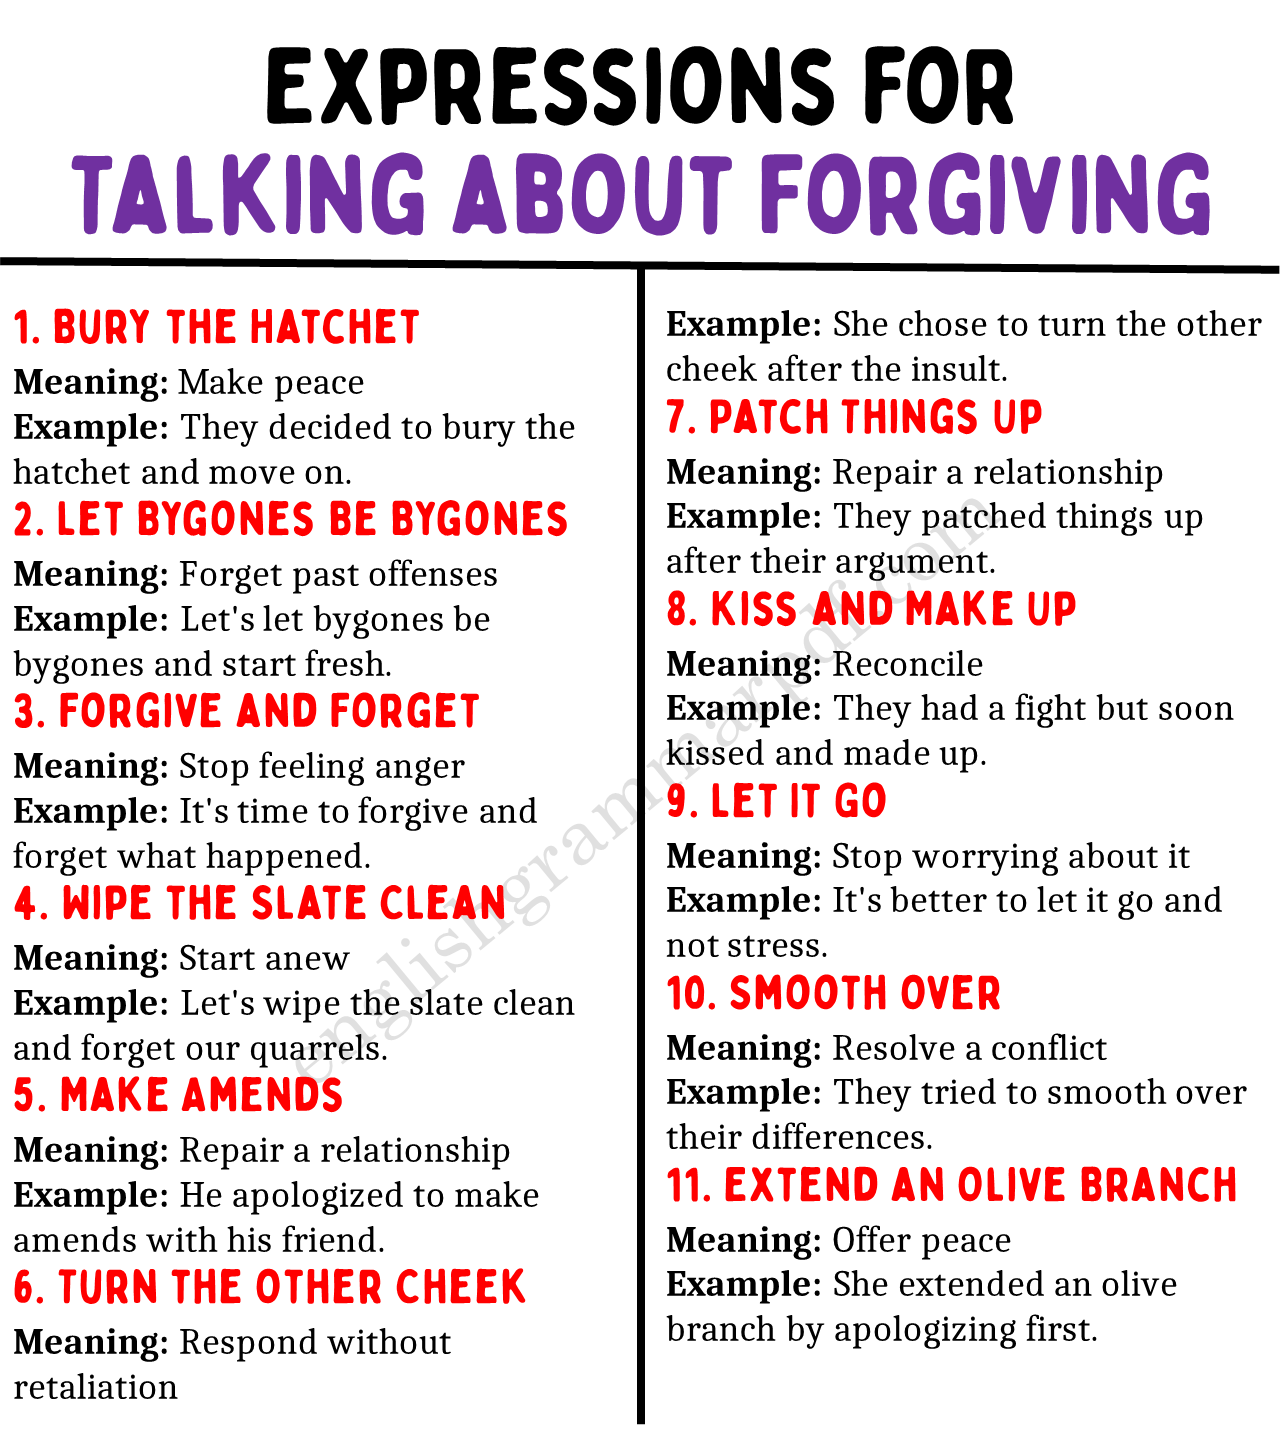 Expression for Talking about Forgiving